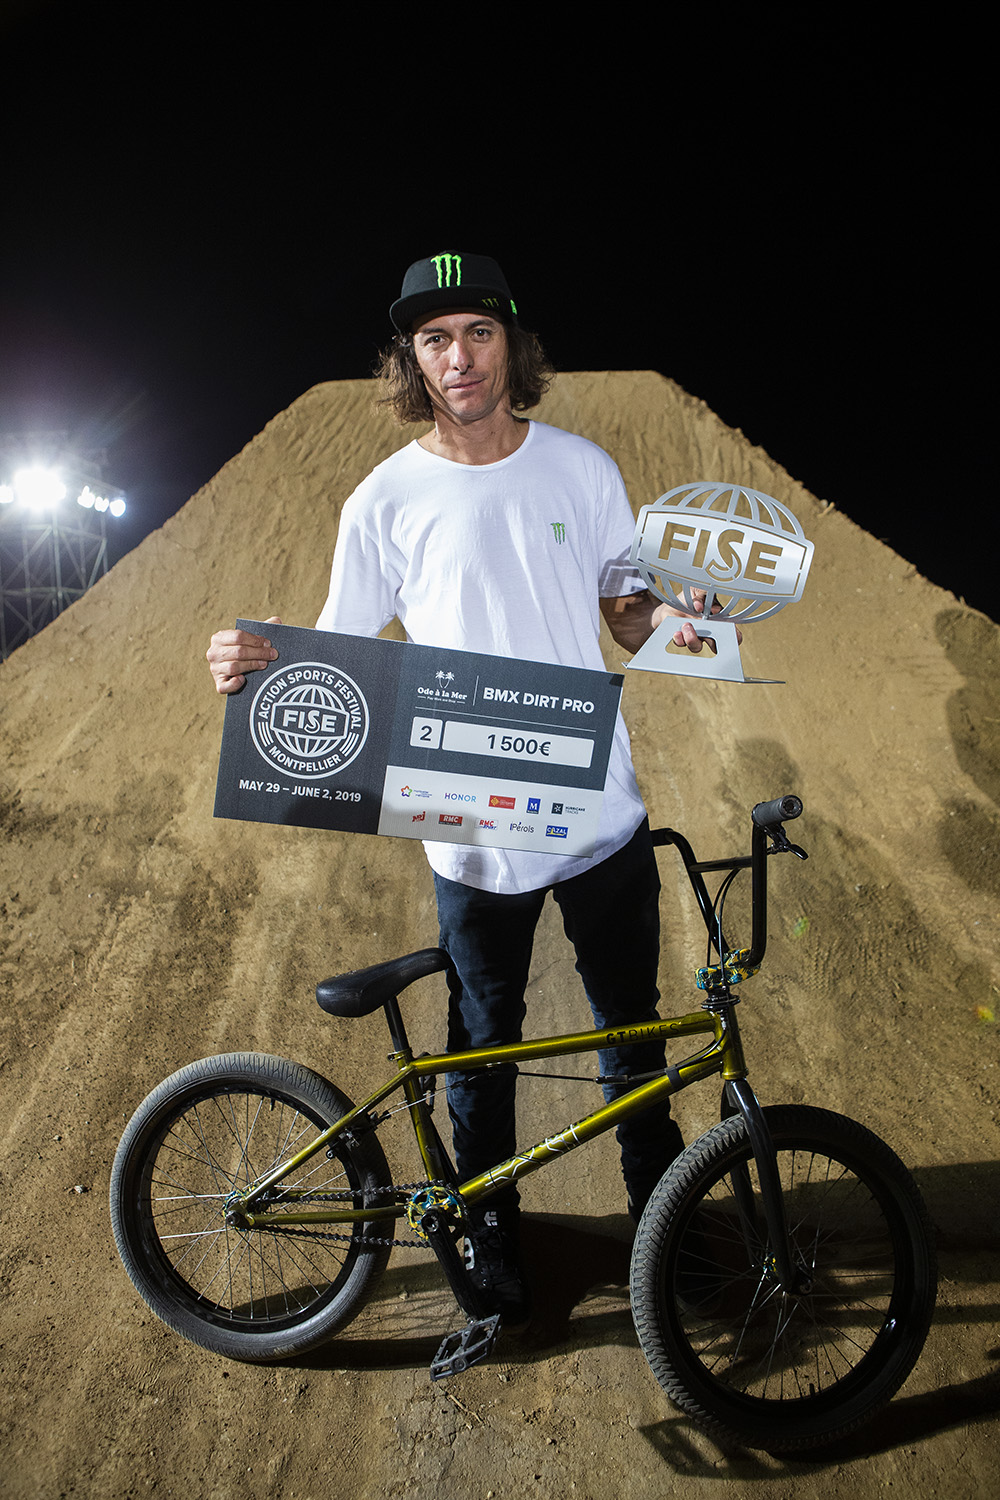 Monster Energy’s Leandro Moreira Takes Second Place in BMX Dirt at FISE Montpellier